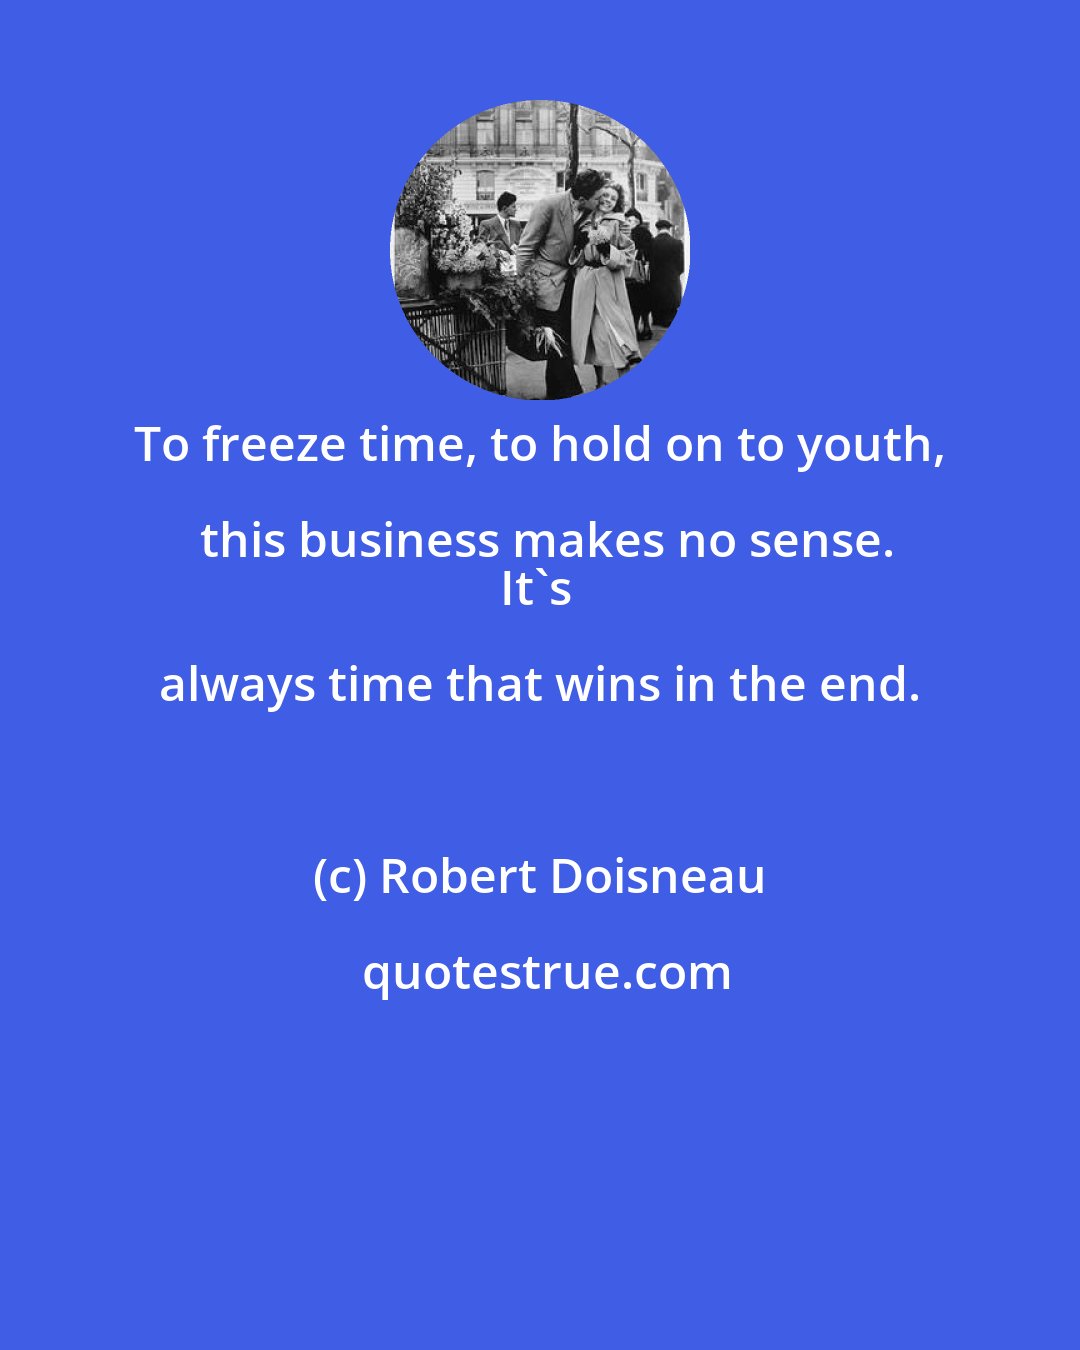 Robert Doisneau: To freeze time, to hold on to youth, this business makes no sense.
It's always time that wins in the end.